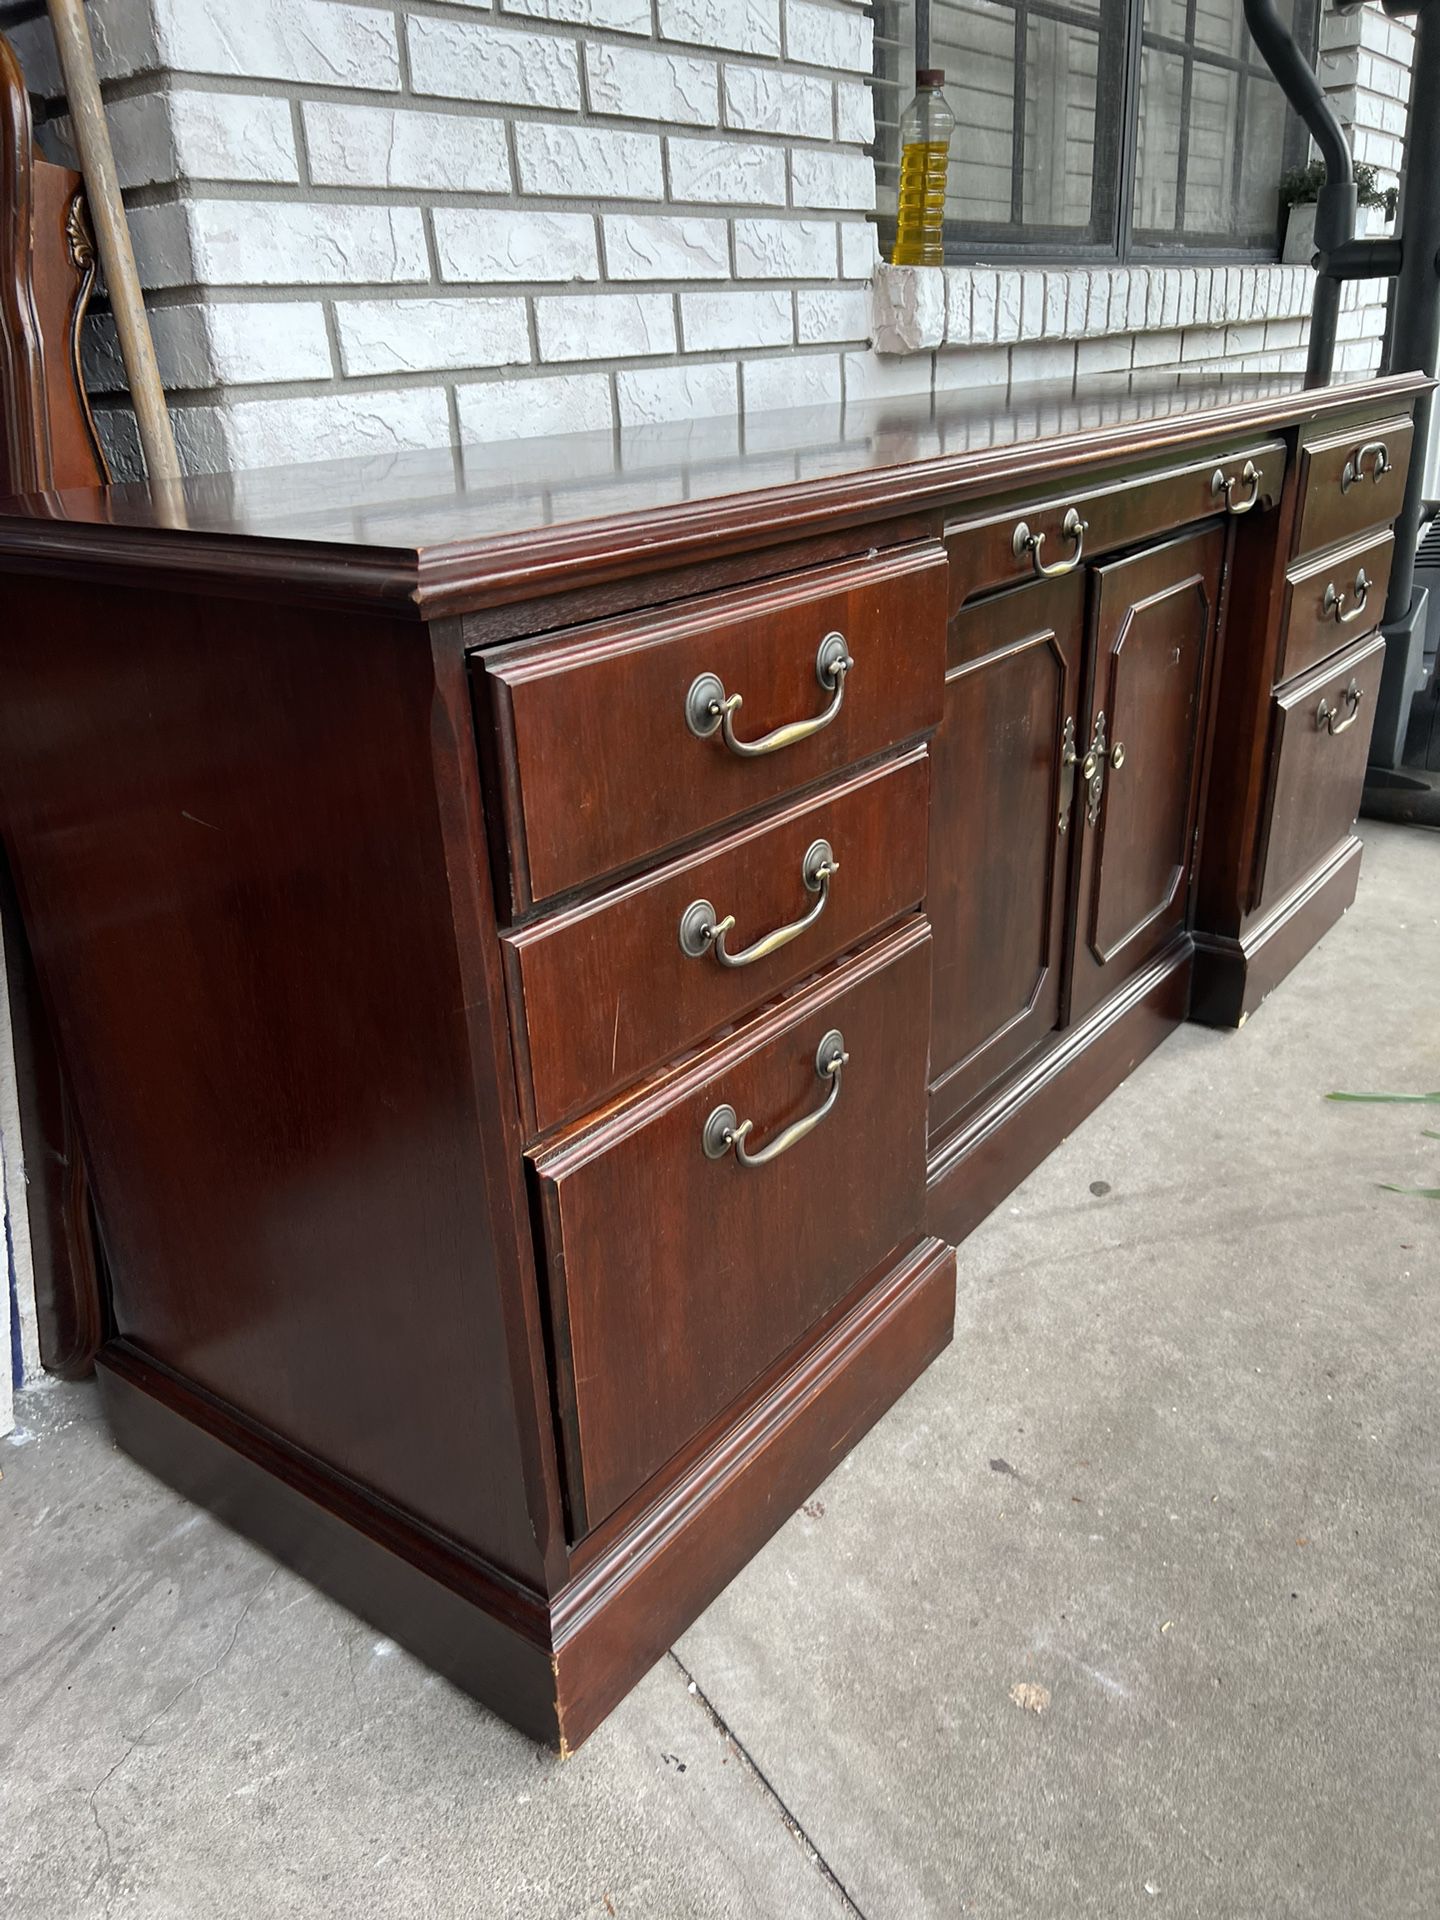 Hutch/Credenza Buffet Real Wood Strong Heavy Excellent Condition$150  68.5 by 20 by 30